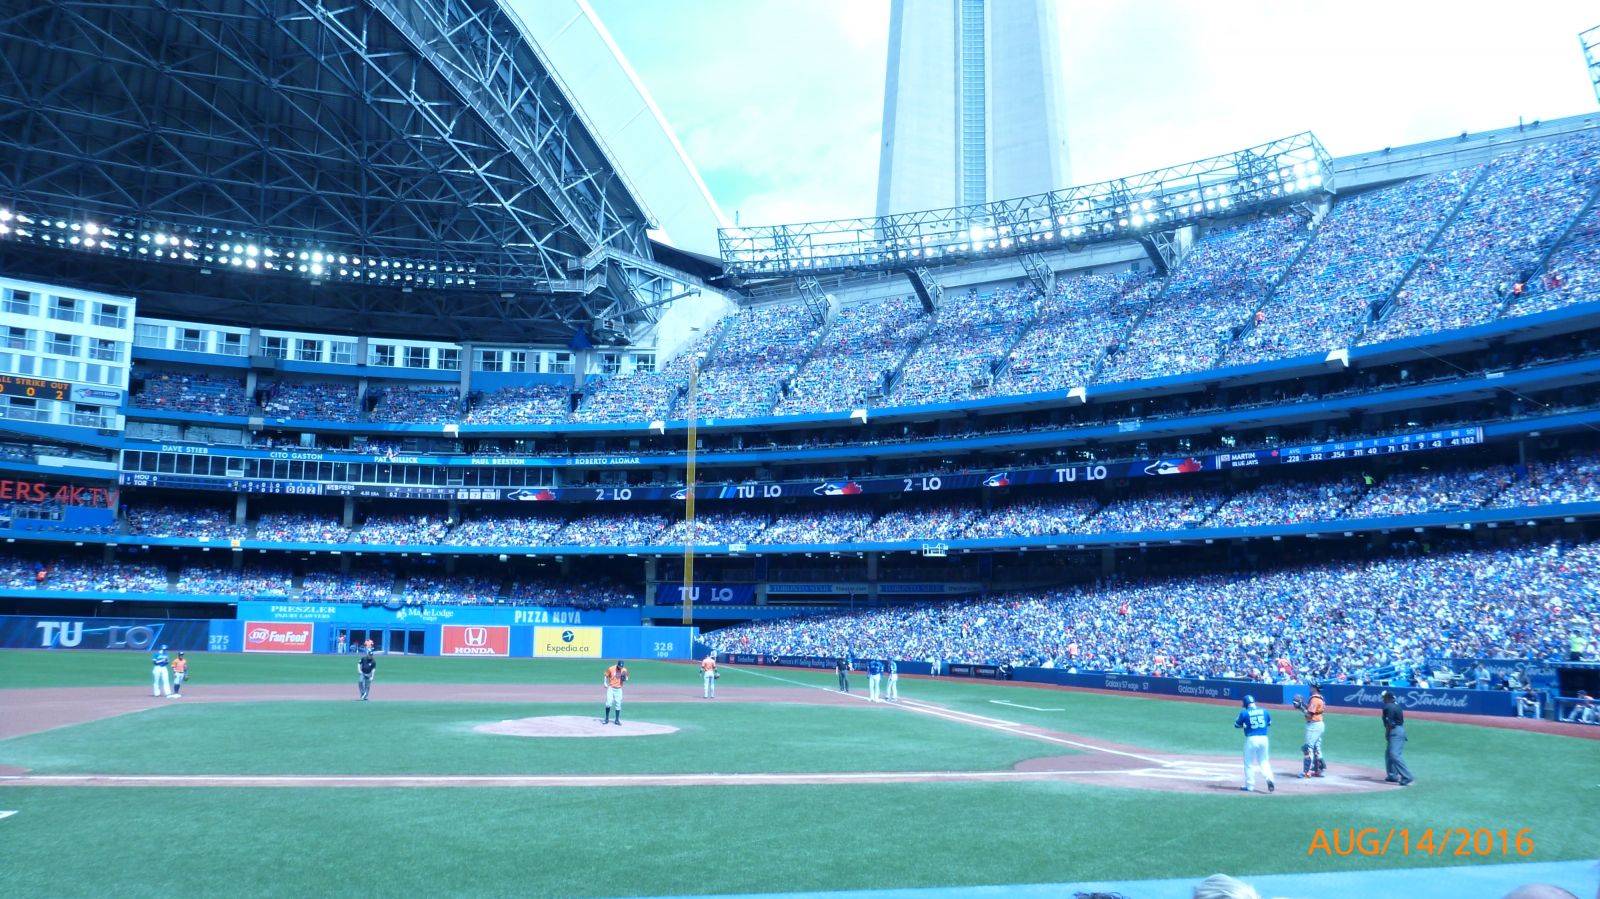 section 126, row 11 seat view  for baseball - rogers centre